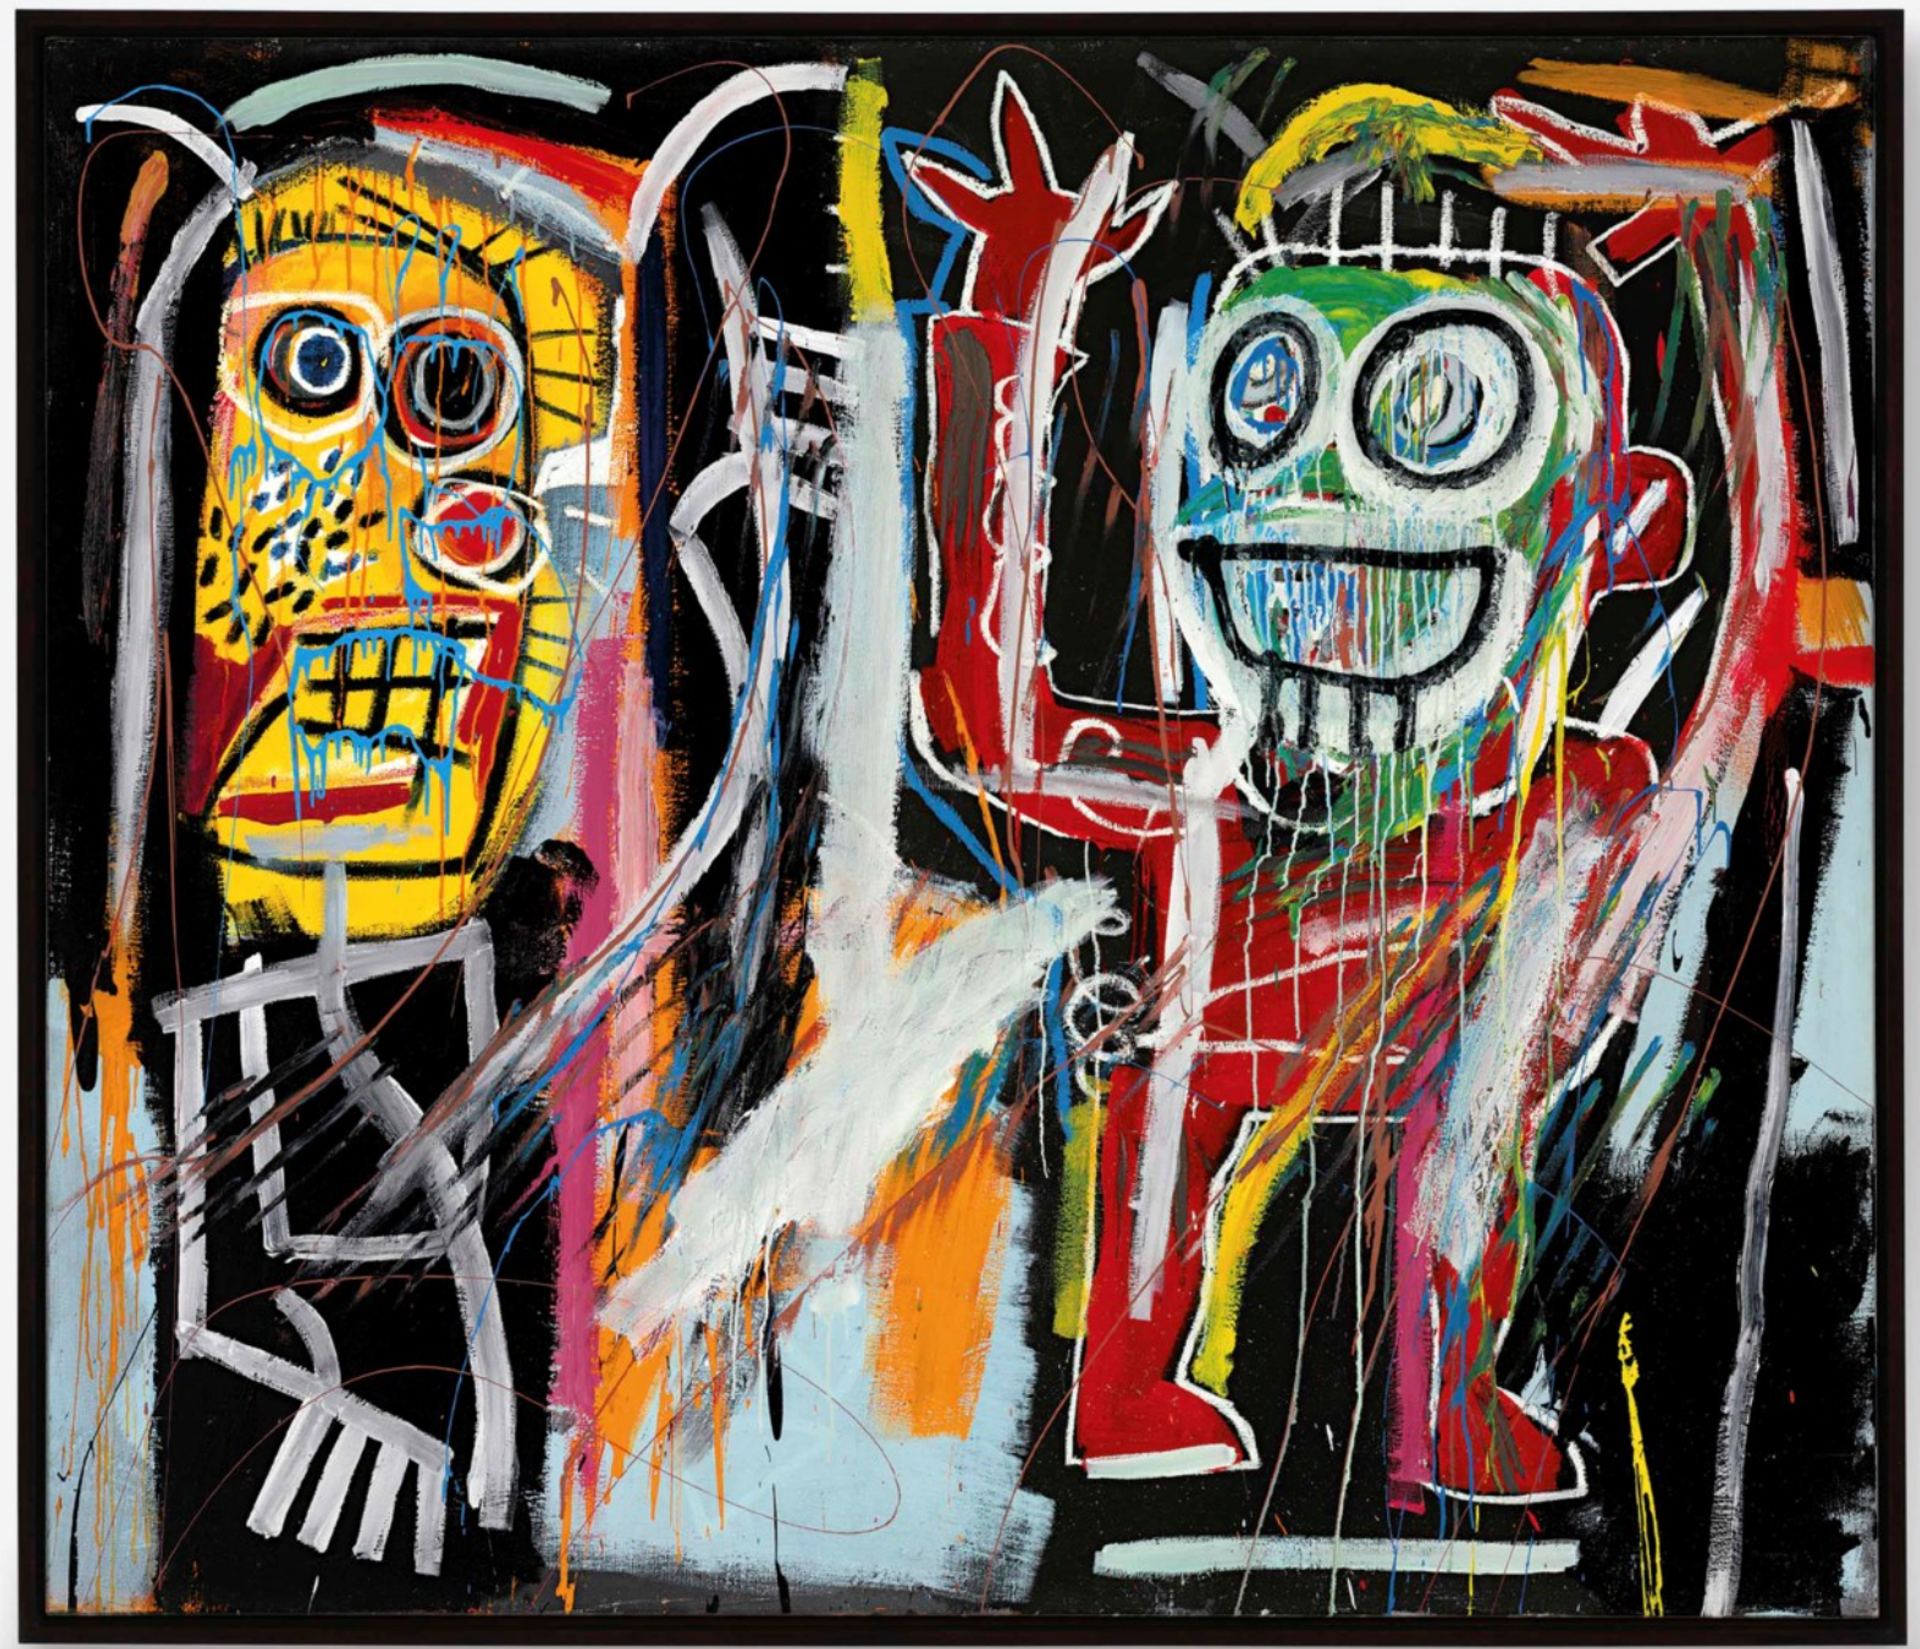 Set against a backdrop of intense, inky blackness, the brightly colored figures in Jean-Michel Basquiat's Dustheads represent the ultimate tour-de-force of expressive line, color and form that has come to represent Basquiat's iconic painterly oeuvre.